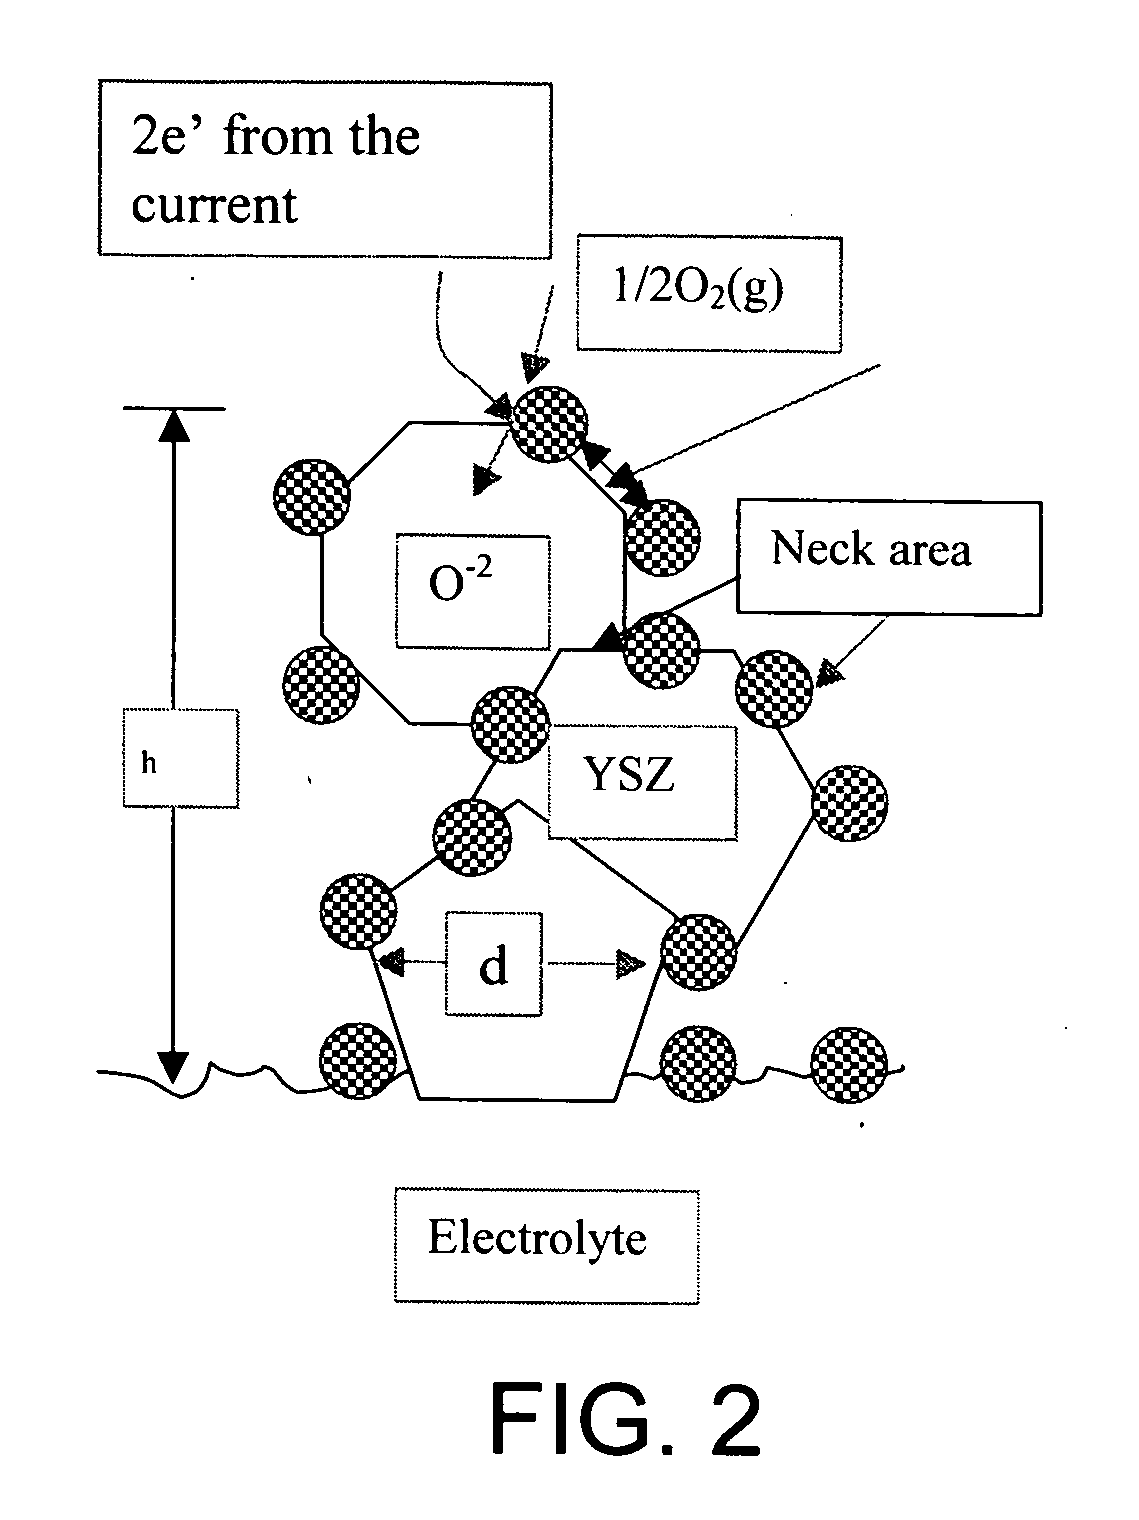 Method of fabricating composite cathodes for solid oxide fuel cells by infiltration